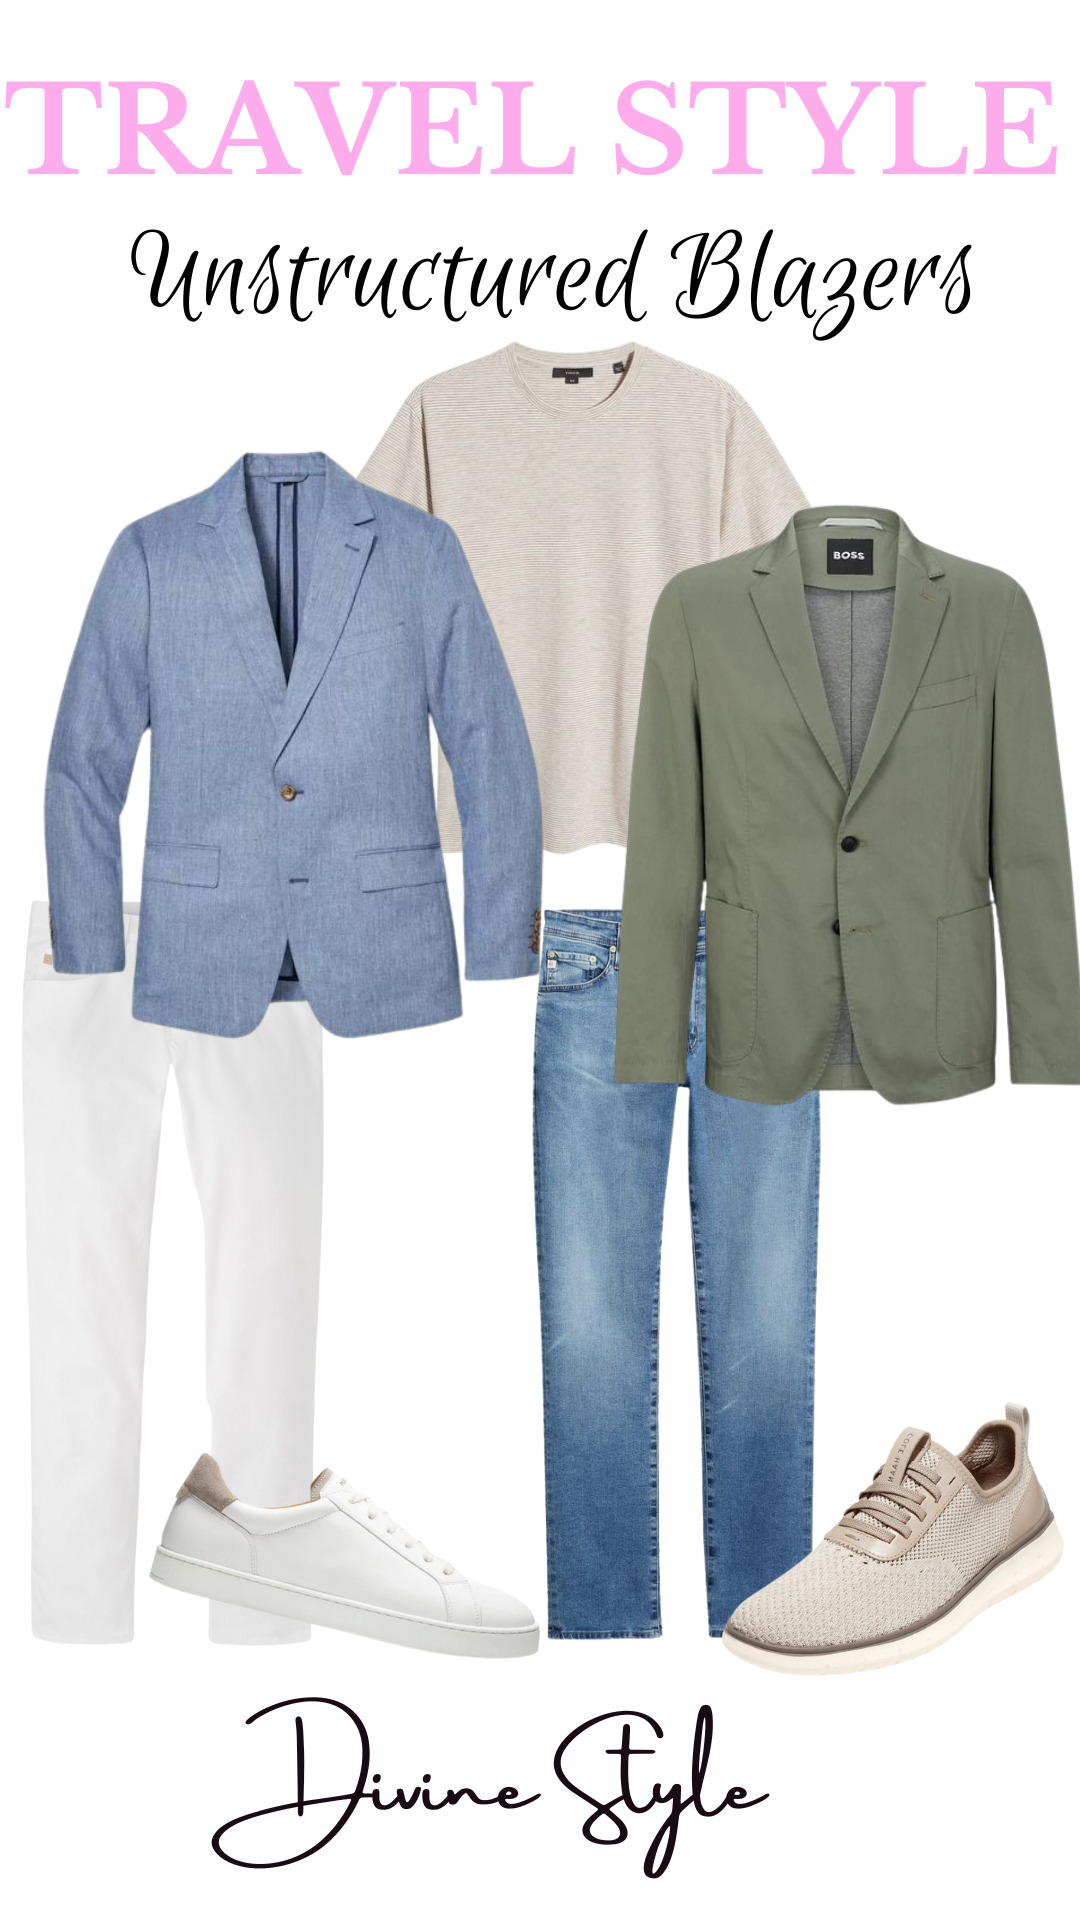 Best-Dressed Travel Outfits, Men's Unstructured Blazers, men's travel outfi